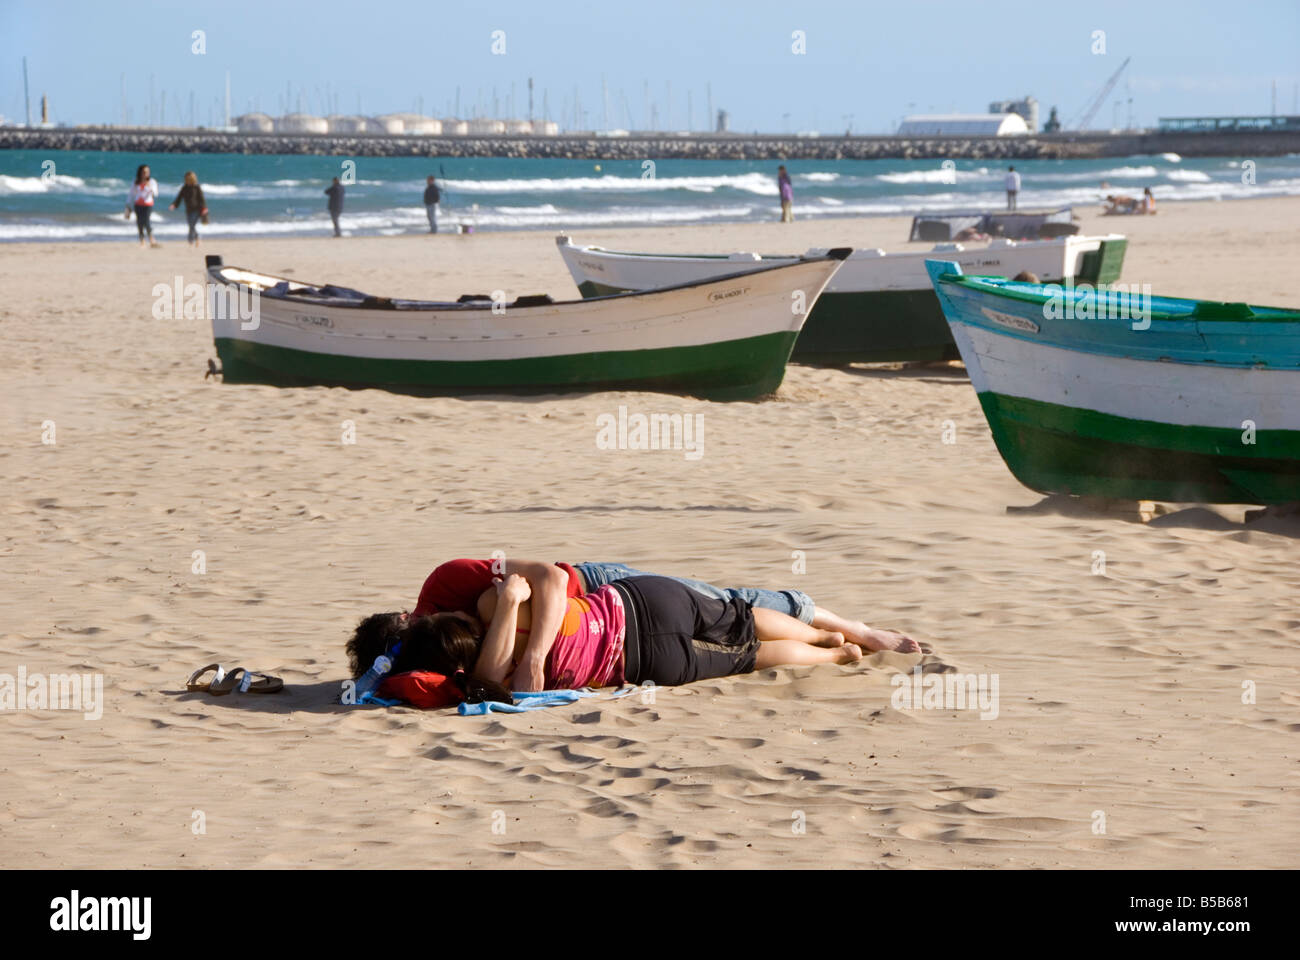 Couple sleeping on a beach with wooden boats on Playa Malvarrosa in the city of Valencia Spain Stock Photo